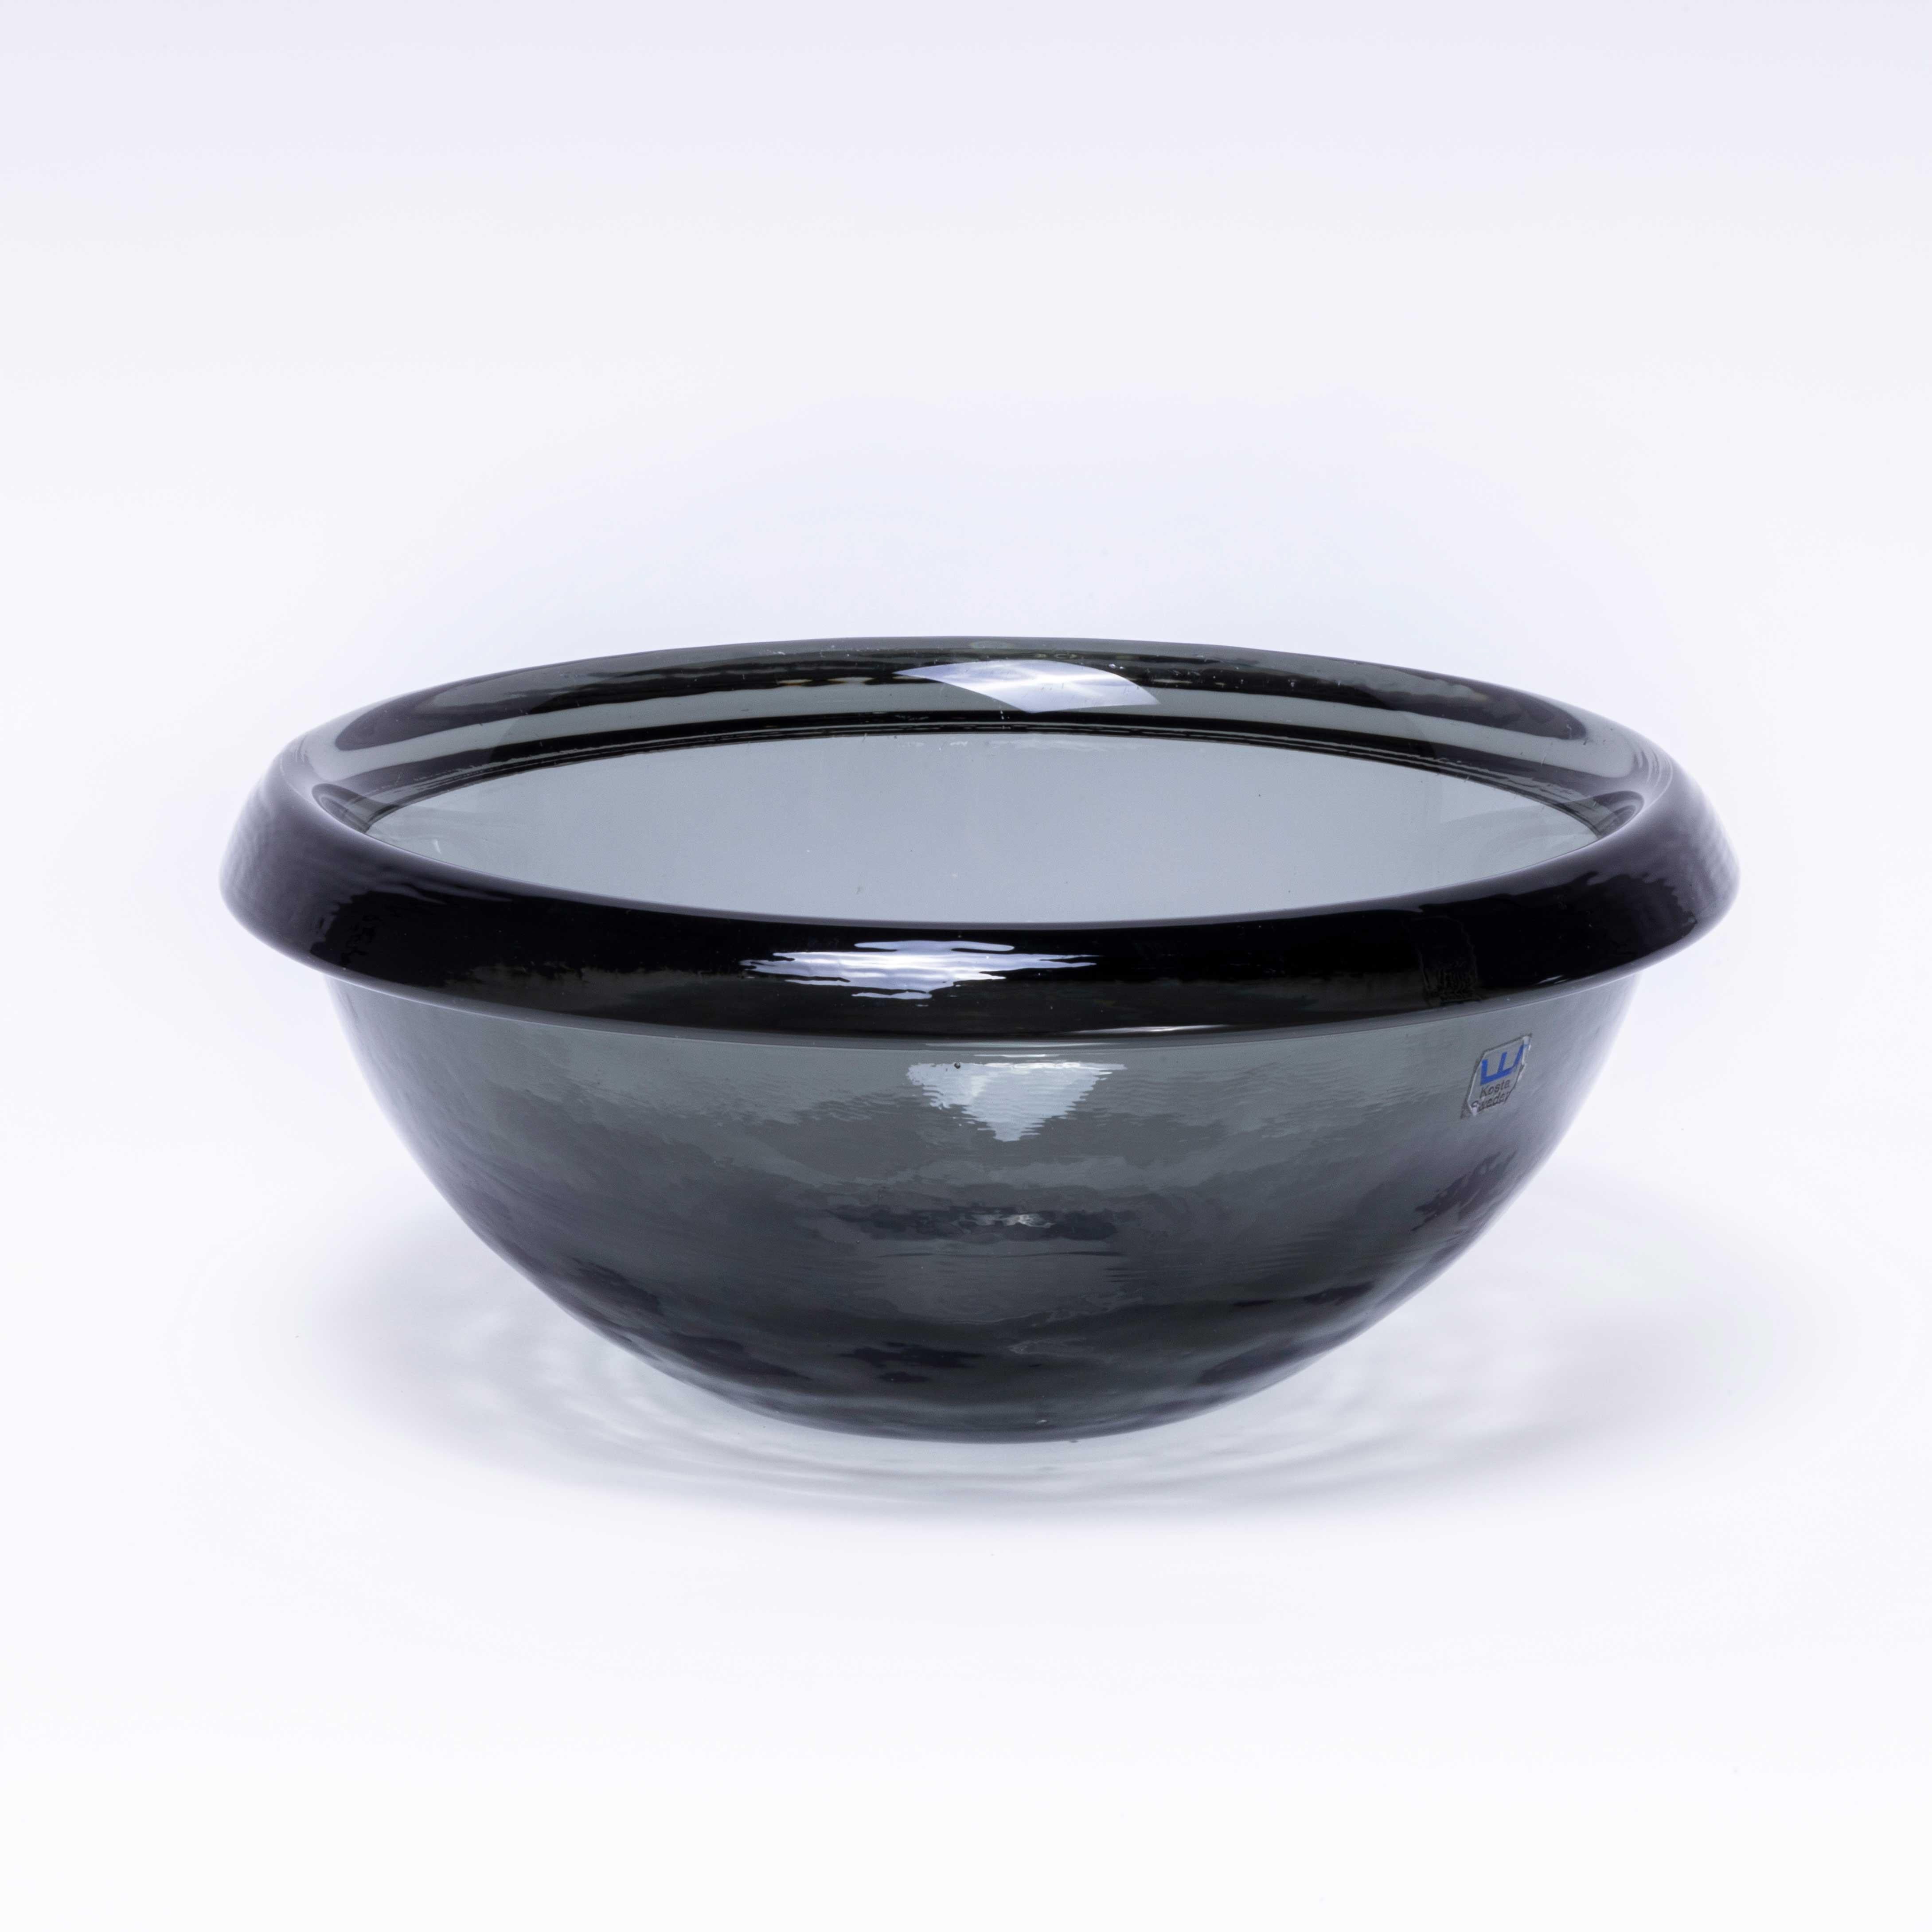 Mid century Kosta Boda Swedish glass art bowl
Mid century Kosta Boda Swedish glass art bowl. Beautiful glass bowl made in Sweden. Black with thick dark rim. Excellent condition, no chips, cracks or faults.

Workshop report
Our workshop team